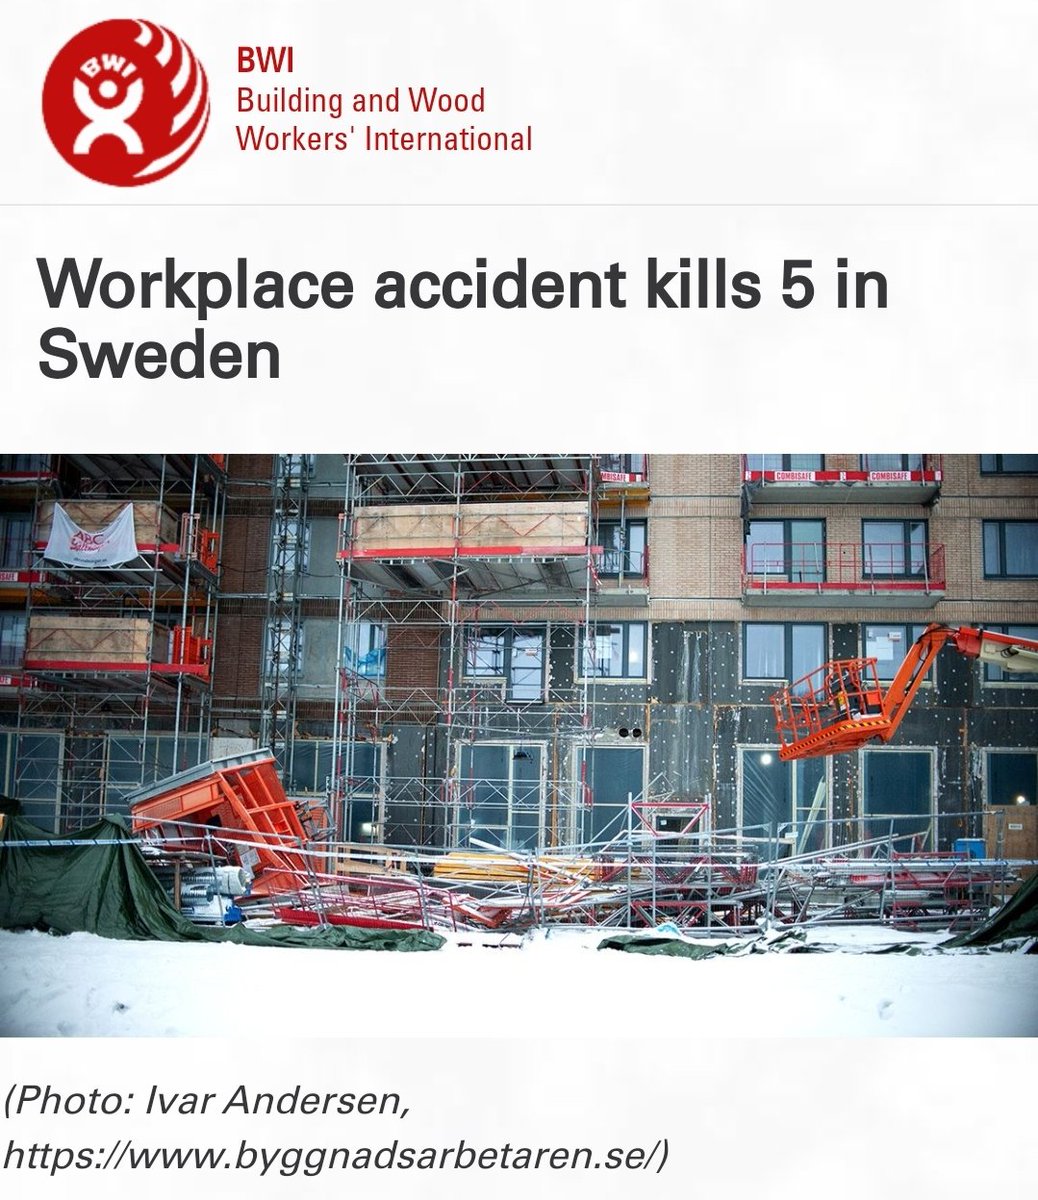 BWI joins @Byggnads in expressing solidarity & condolences to the families & colleagues of 5 individuals who lost their lives in a tragic construction accident in Sweden on Monday. Read more.⬇️ bwint.org/cms/workplace-…?